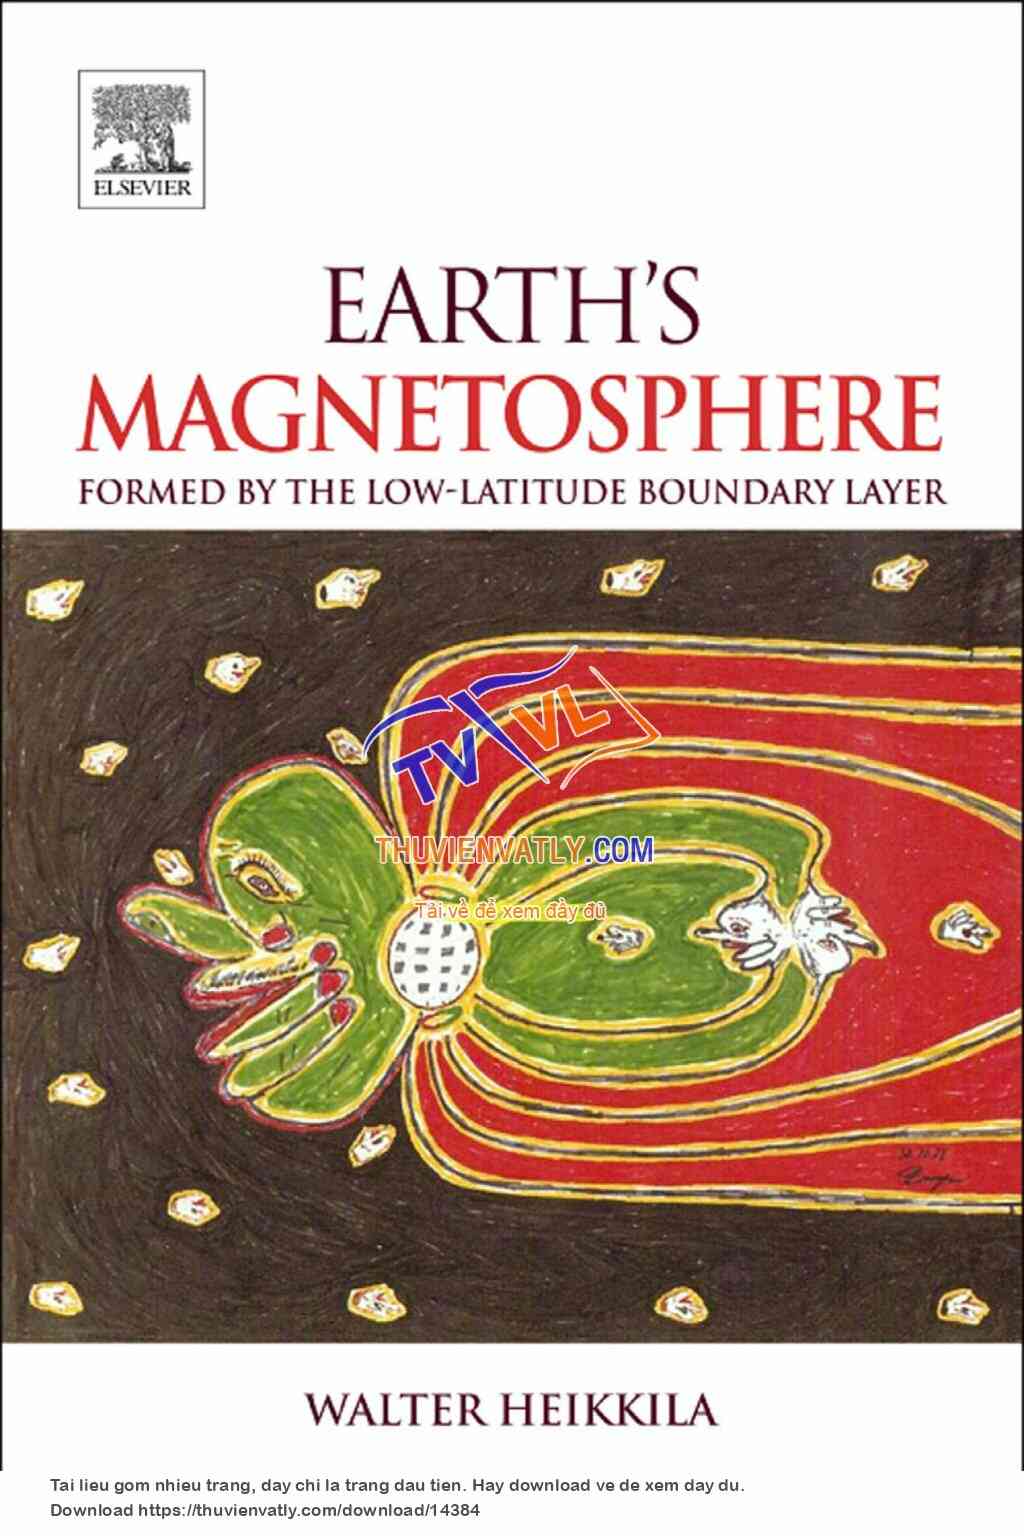 Earth's Magnetosphere - Formed by the Low-Lat. Bound. Lyr. - W. Heikkila (Elsevier, 2011)